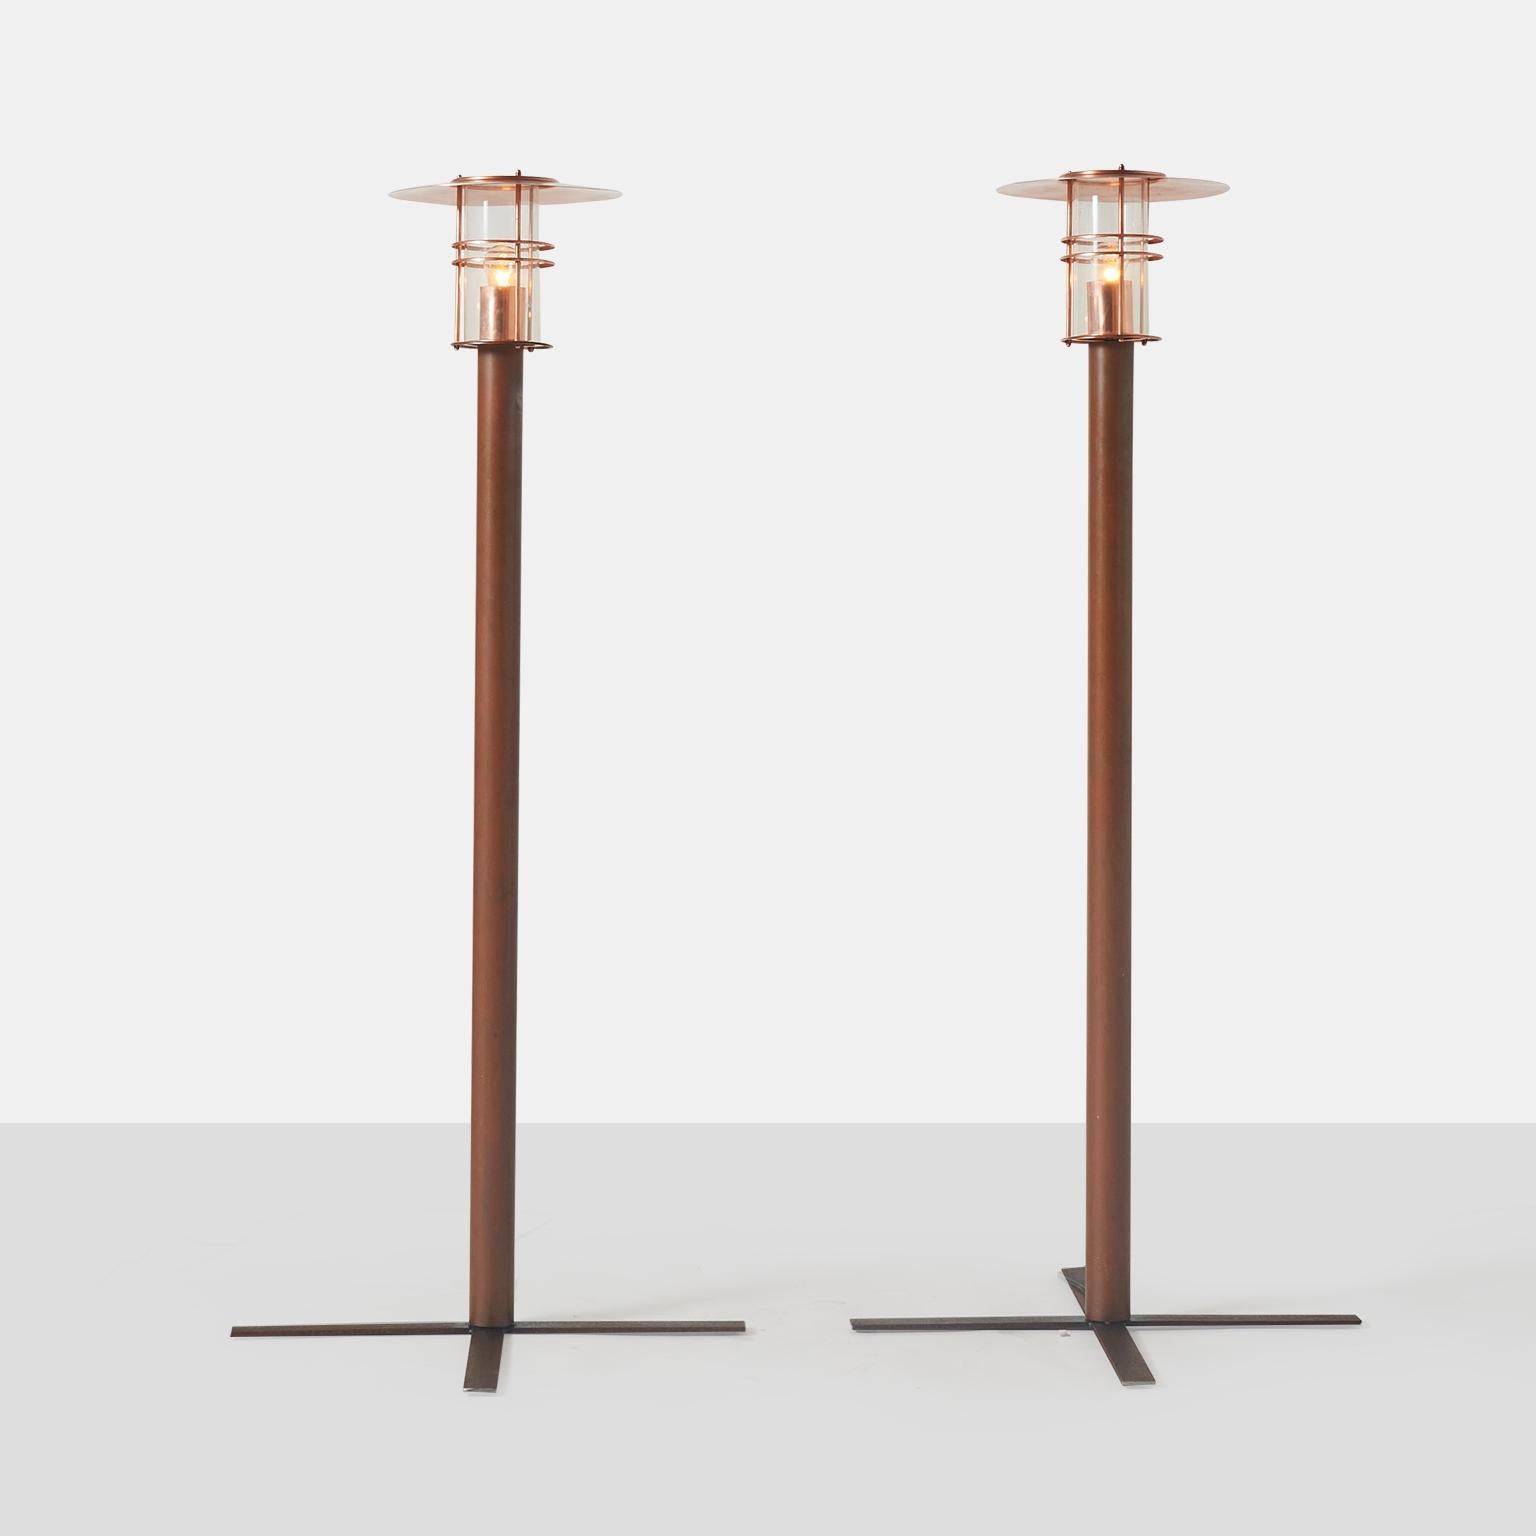 A pair of copper outdoor or sidewalk lamps The light fixture has been restored to remove some previous denting, and the copper is bright and shiny. There is some attractive oxidization to the upright post. It appears the lamps were never installed